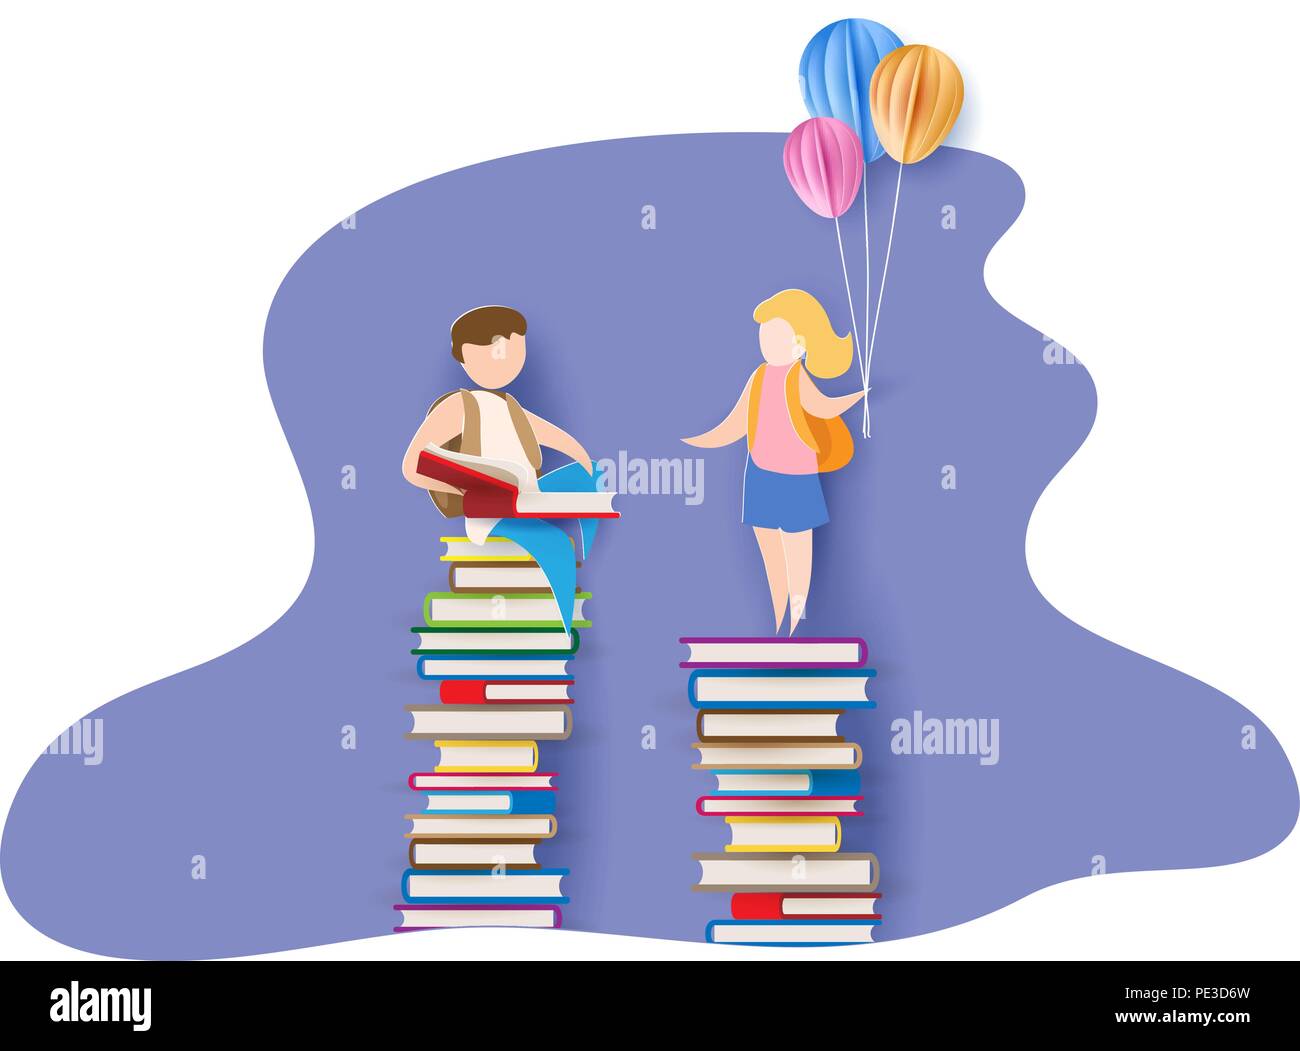 Back to school 1 september card with boy, girl, books. Vector illustration. Paper cut and craft style. Stock Vector